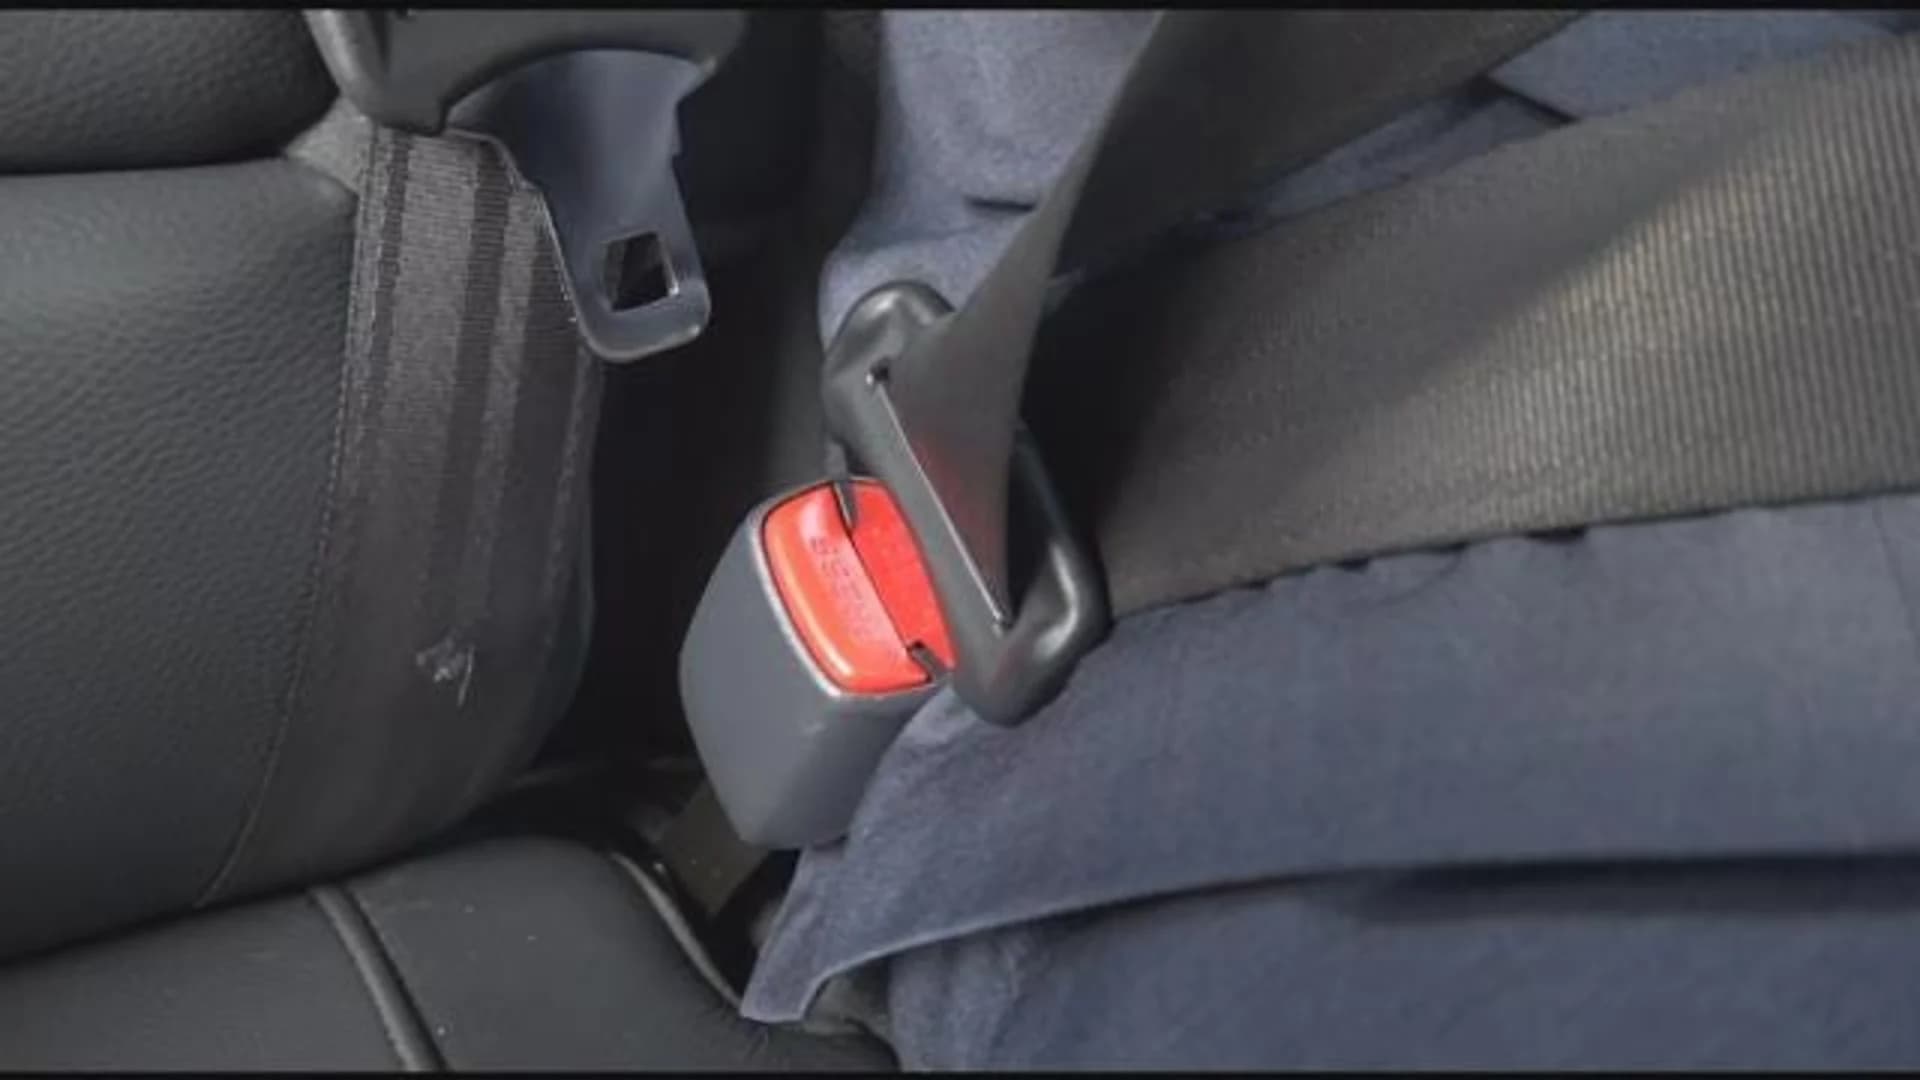 Bill would require New Yorkers to buckle up in back seat